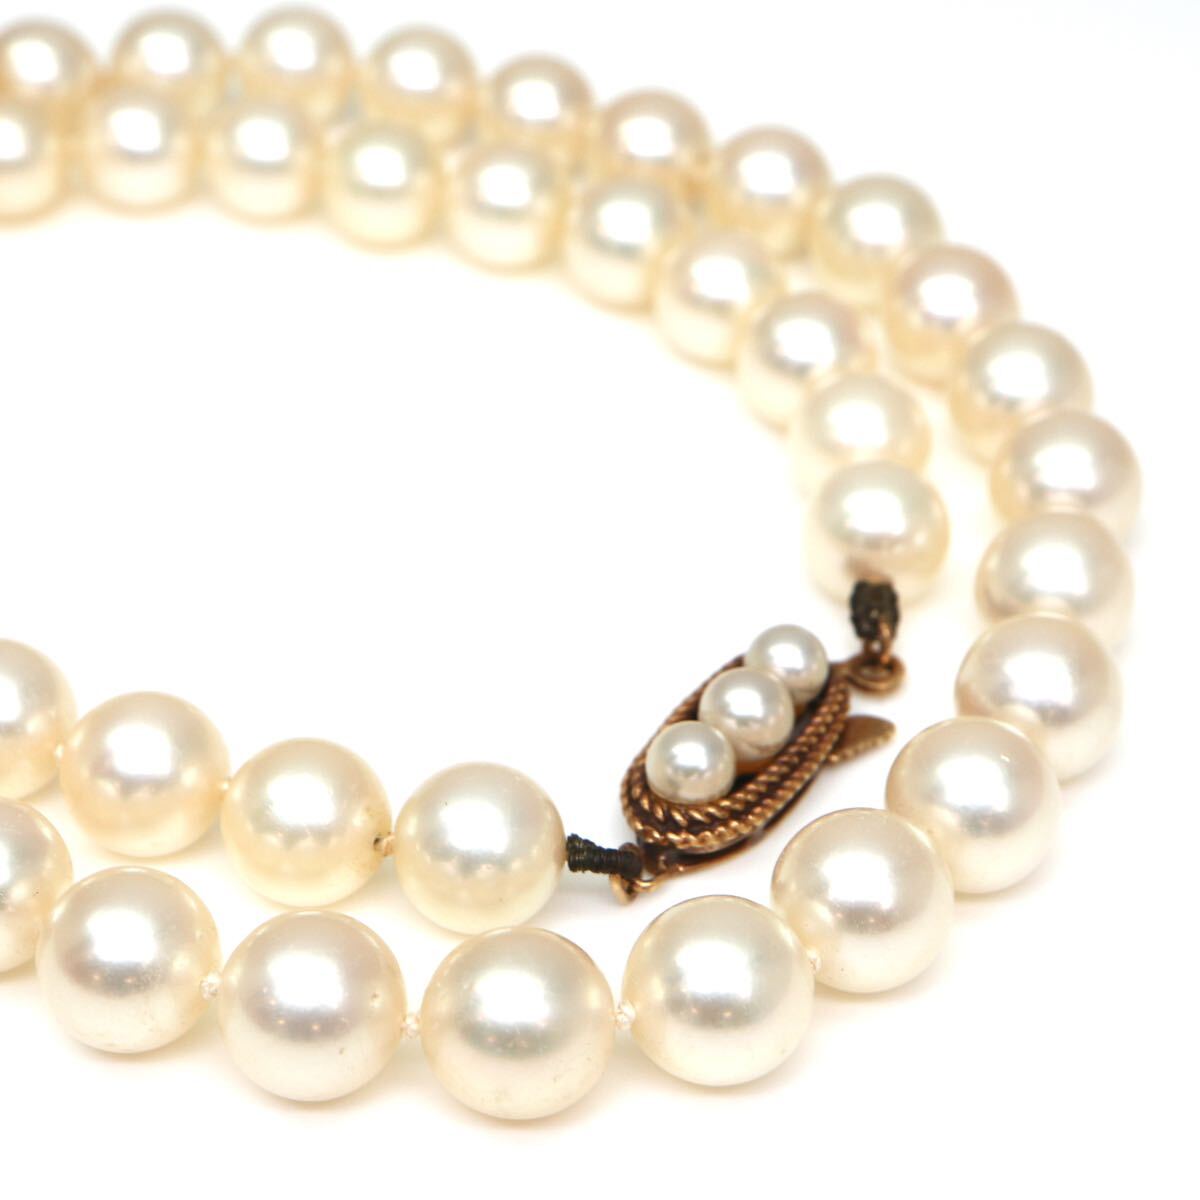 ◆K18 アコヤ本真珠ネックレス/ 17 ◆A 約30.2g 約42.0cm 7.0-7.5mm珠 pearl パール jewelry necklace ジュエリー EA3/EA3_画像1